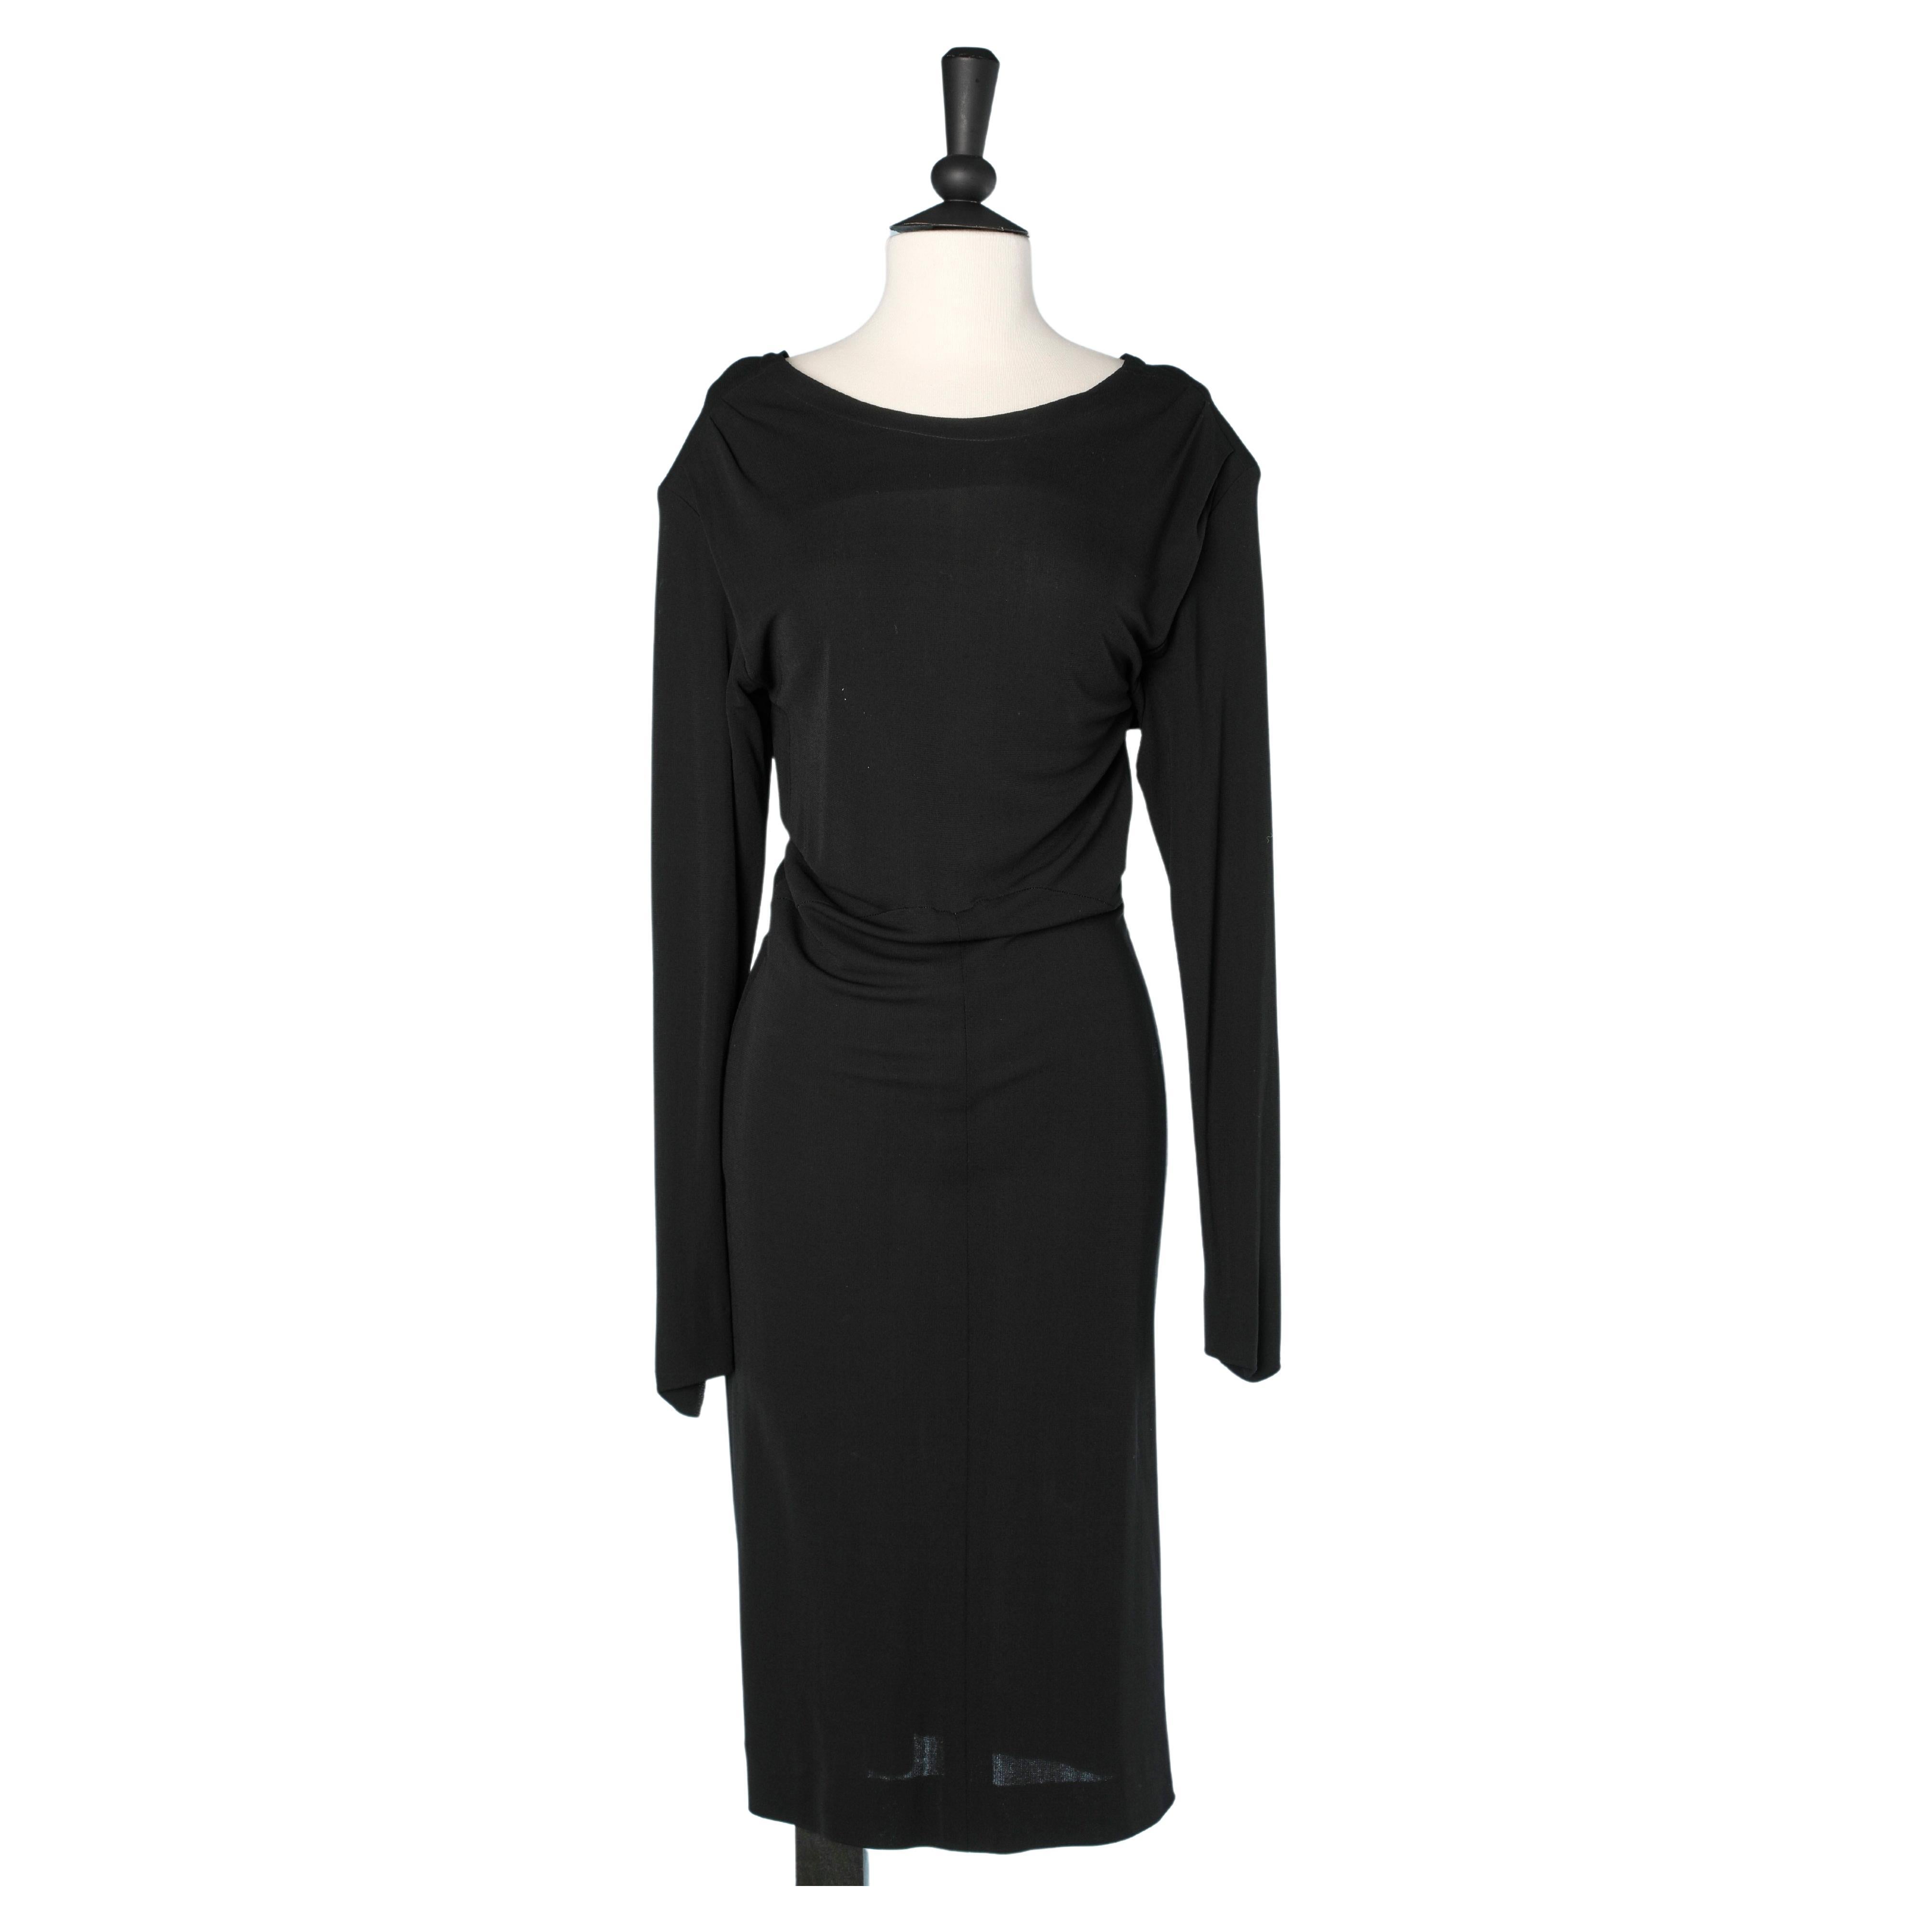 Black dress with open back and gold ring Yves Saint Laurent Rive Gauche 